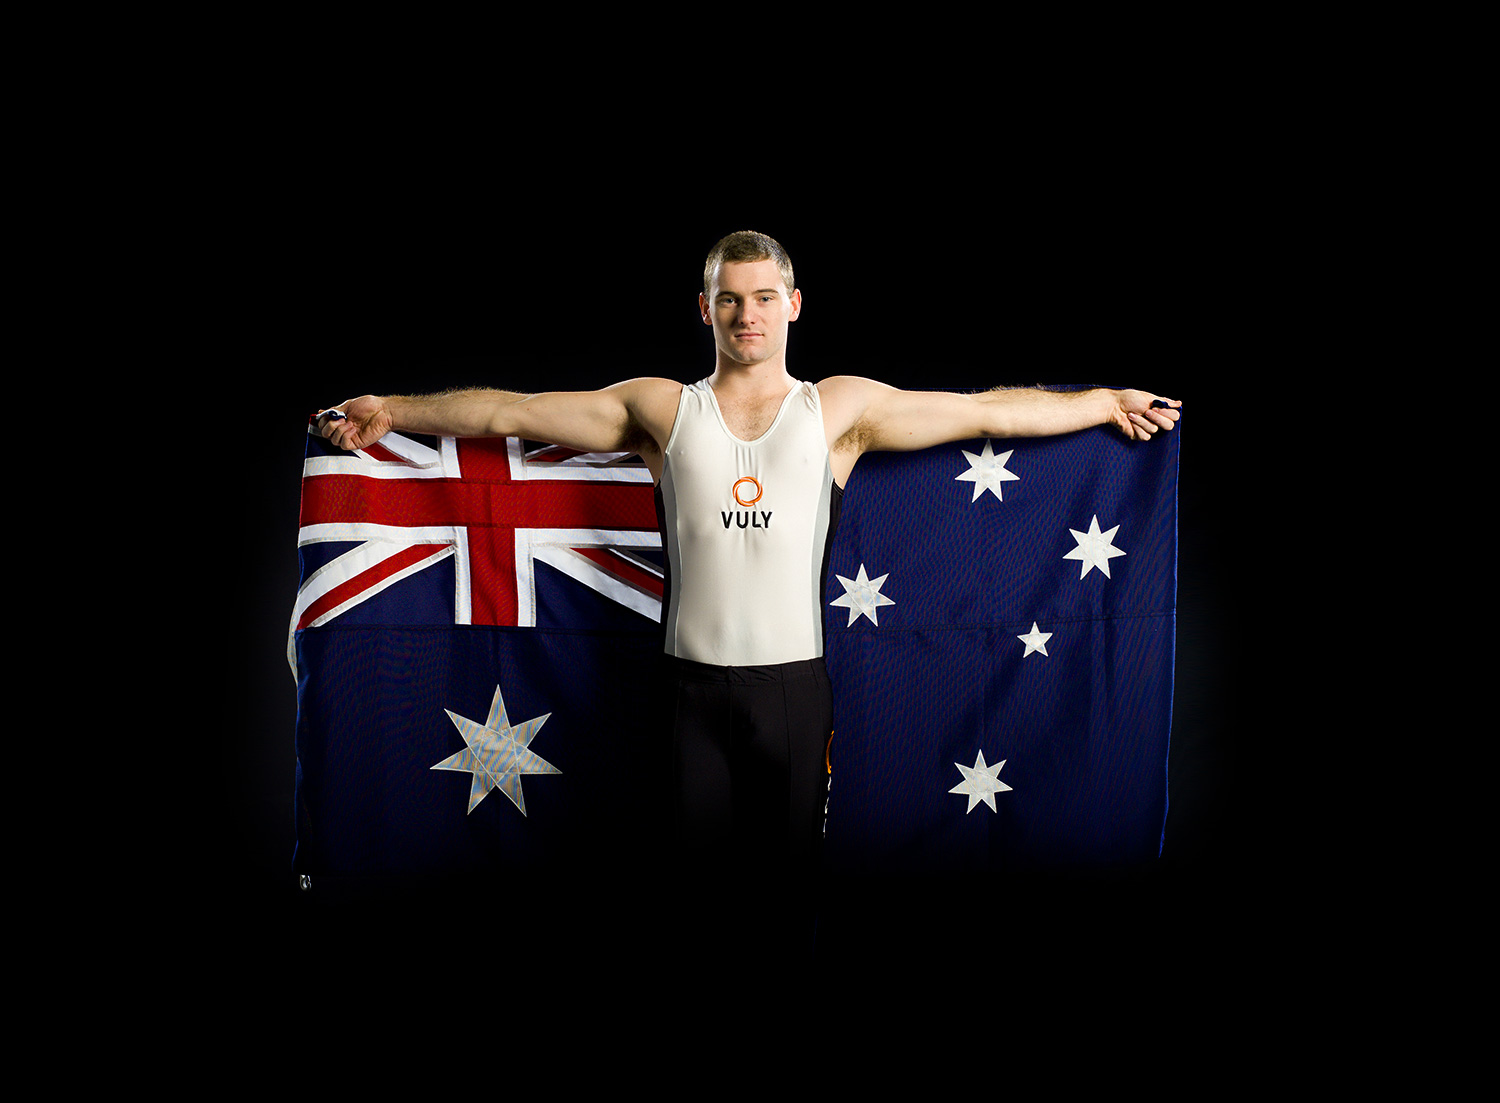 Meet our athlete - Ty Swadling (AUS)